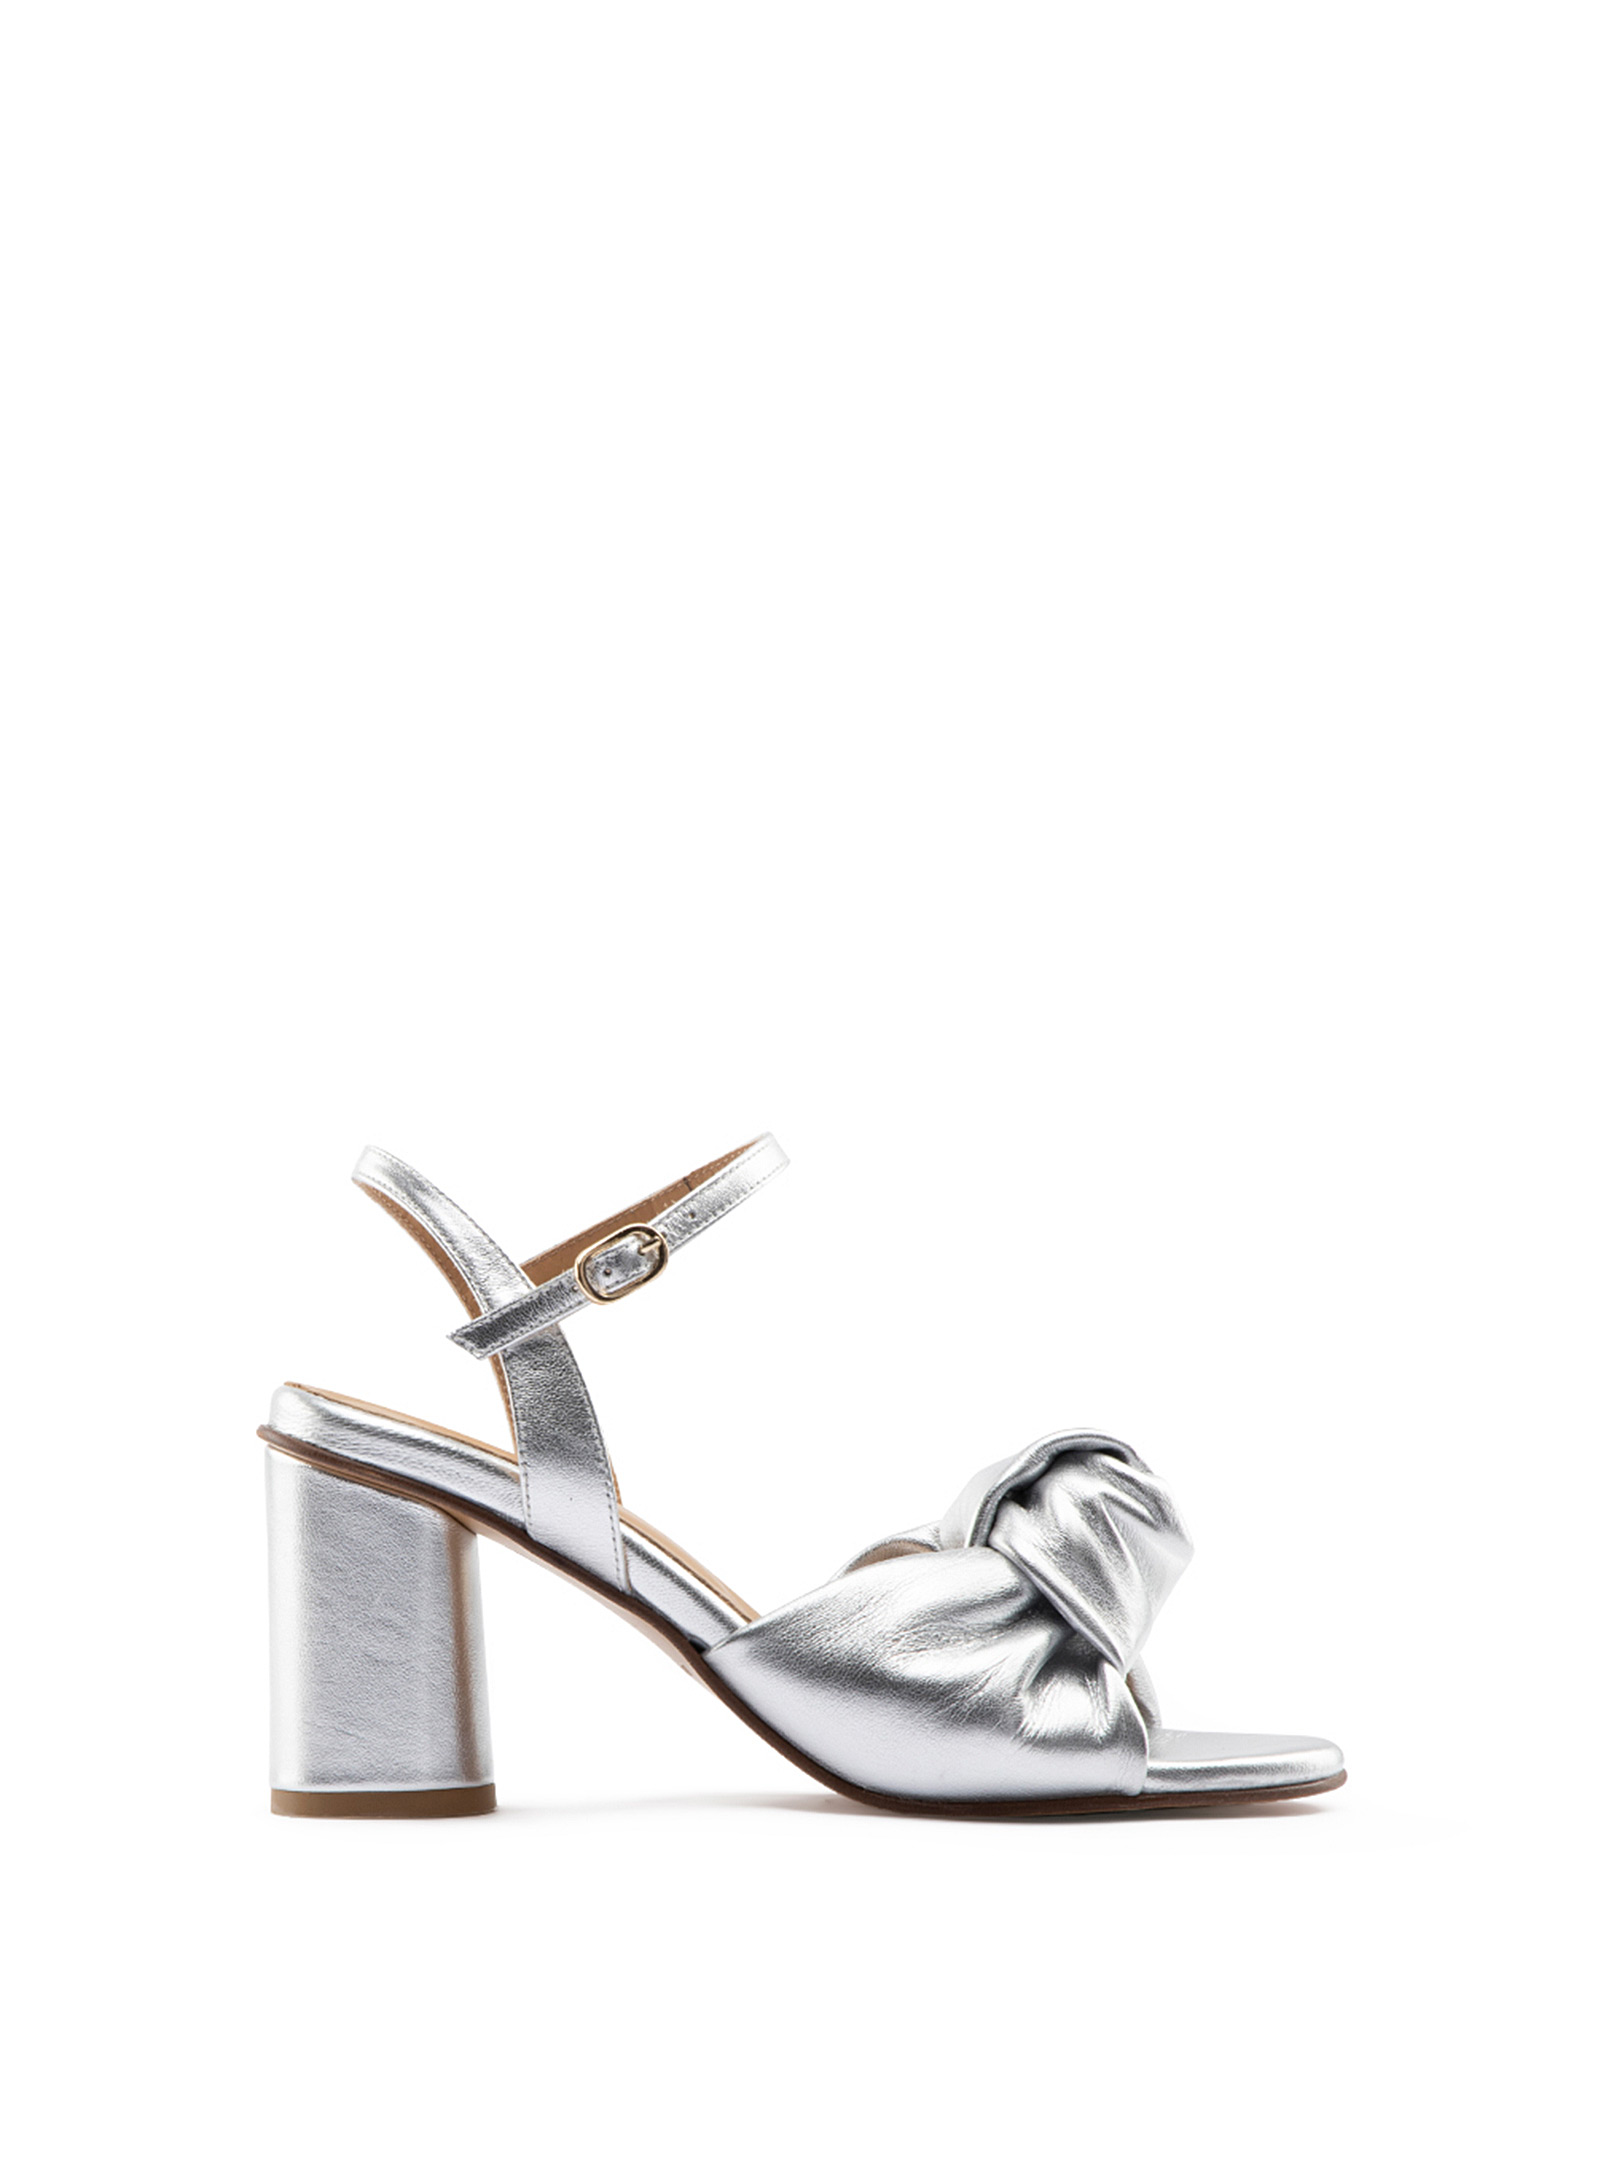 Maguire Noto Block-heel Knotted Sandals Women In Silver